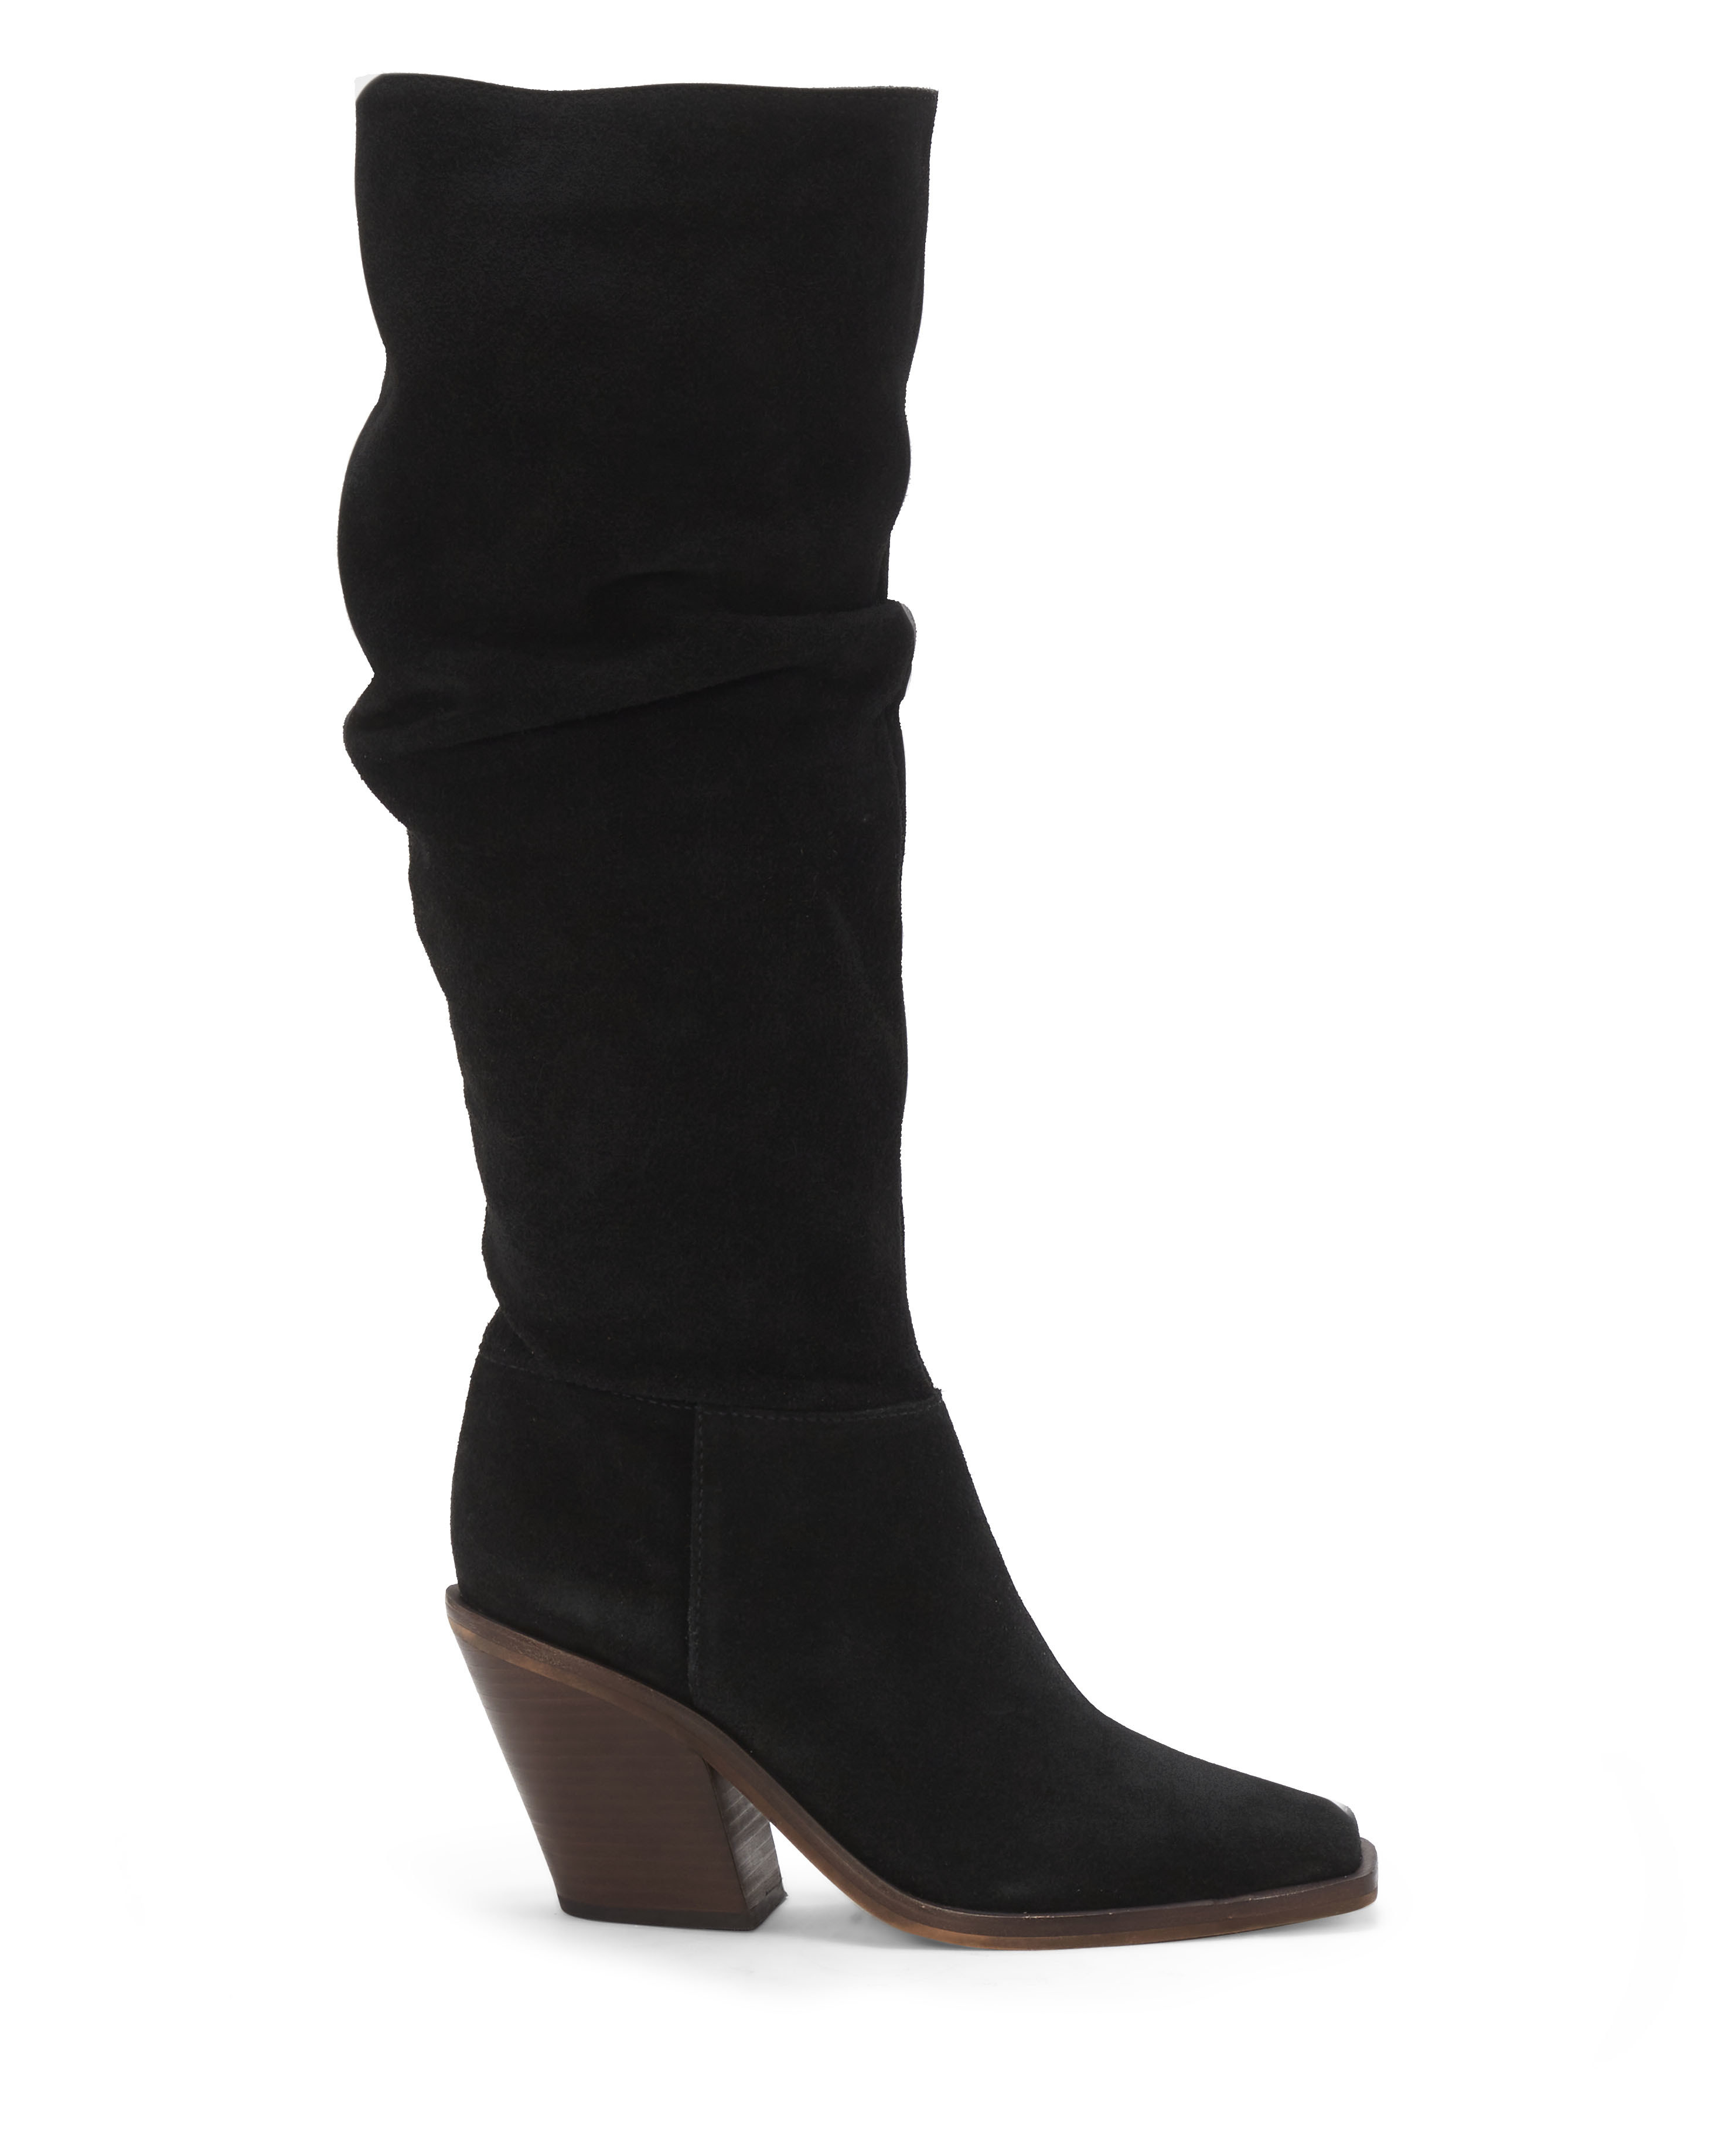 Mesdames Ultimate-Knee High Boot Chaussettes-Super Doux Confortable-Taille unique-Neuf